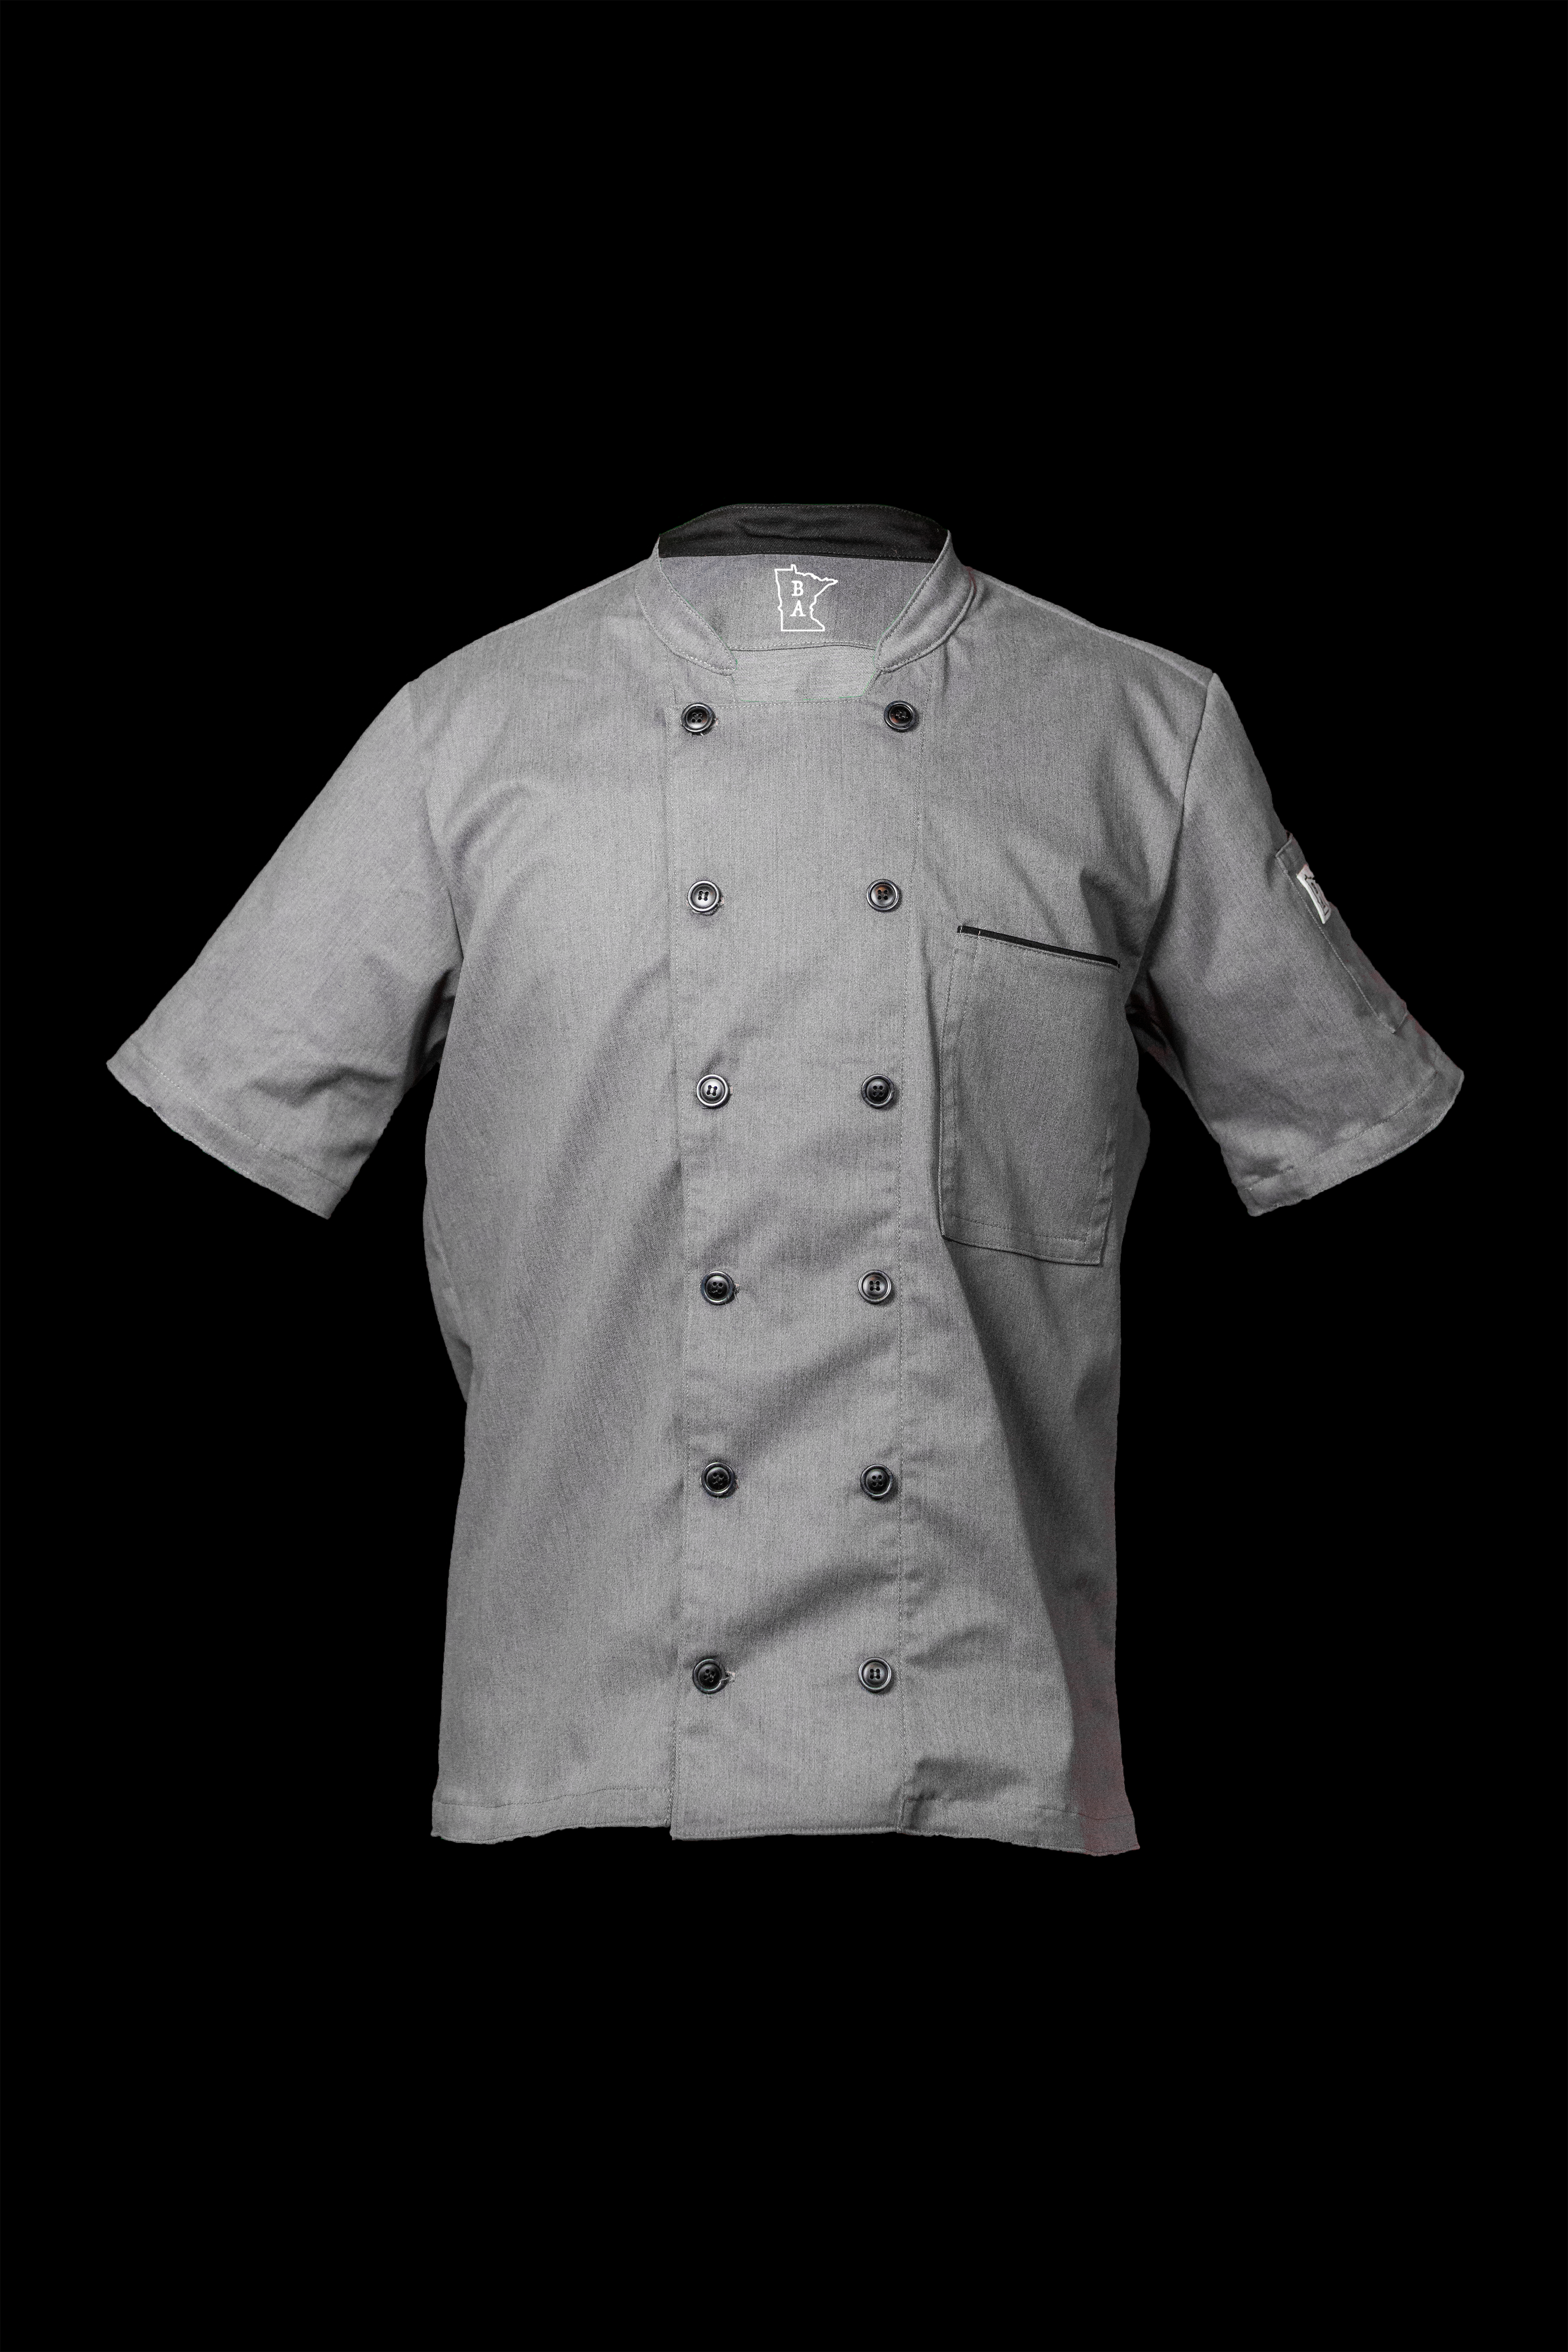 Men's heather gray chef coat with black trim. The material is Salerno Stretch Twill, made for high performance. The chef coat has one upper breast pocket and a left arm duel slotted sleeve pocket with 12 buttons running down the center. Designed by Craftmade Aprons in Minnesota.